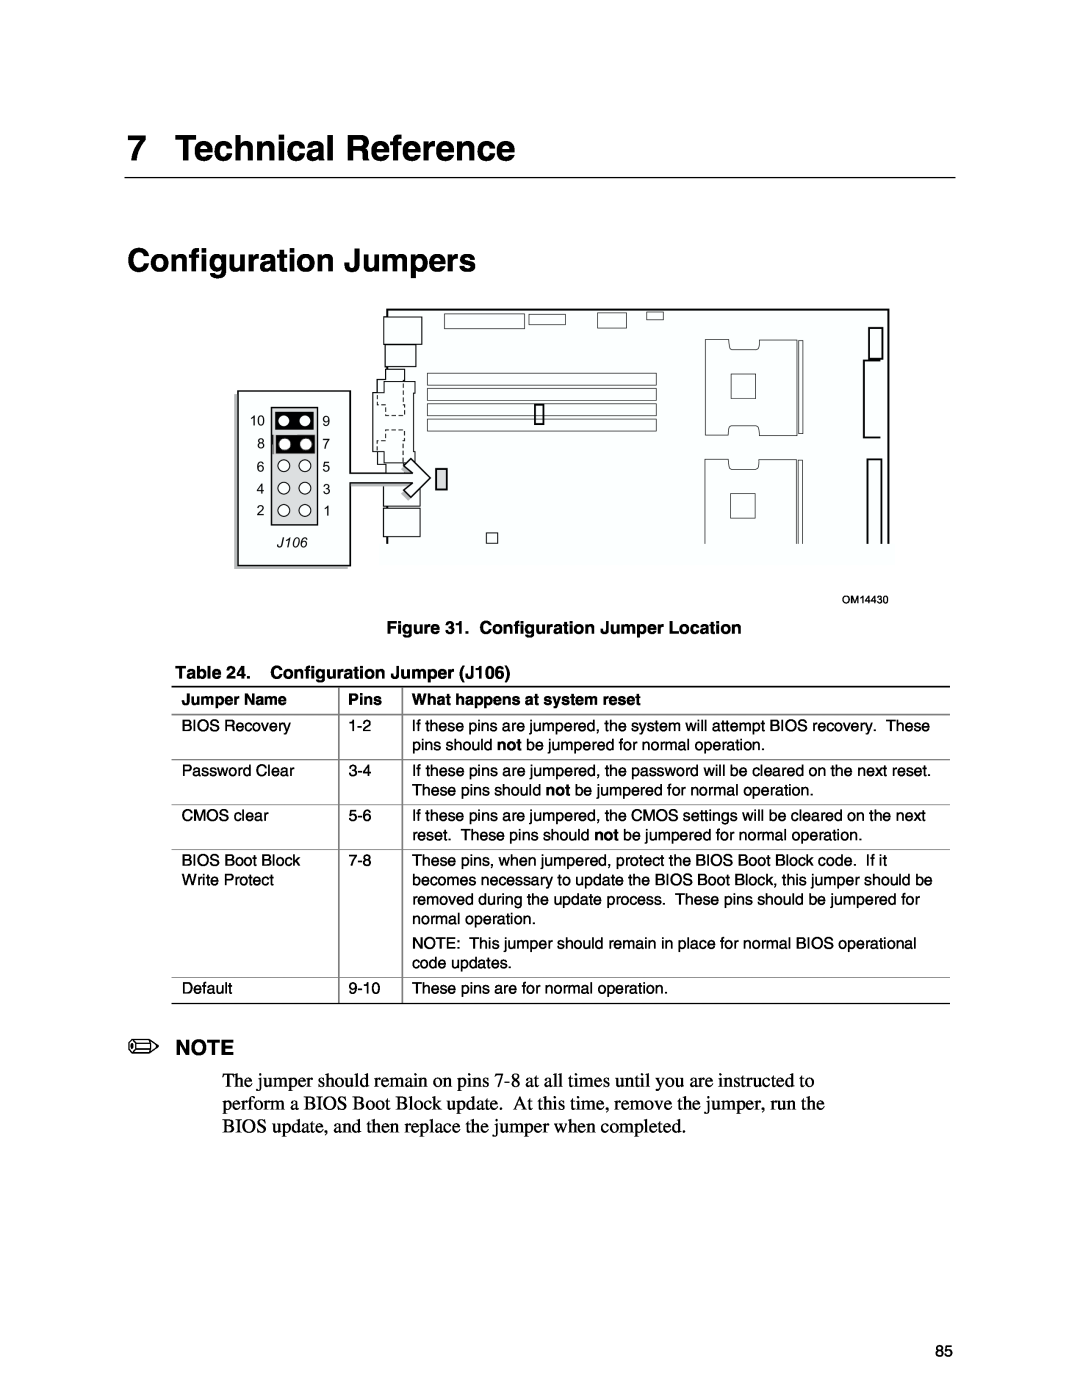 Intel SE7500CW2 Technical Reference, Configuration Jumpers, Configuration Jumper Location, Configuration Jumper J106, Pins 